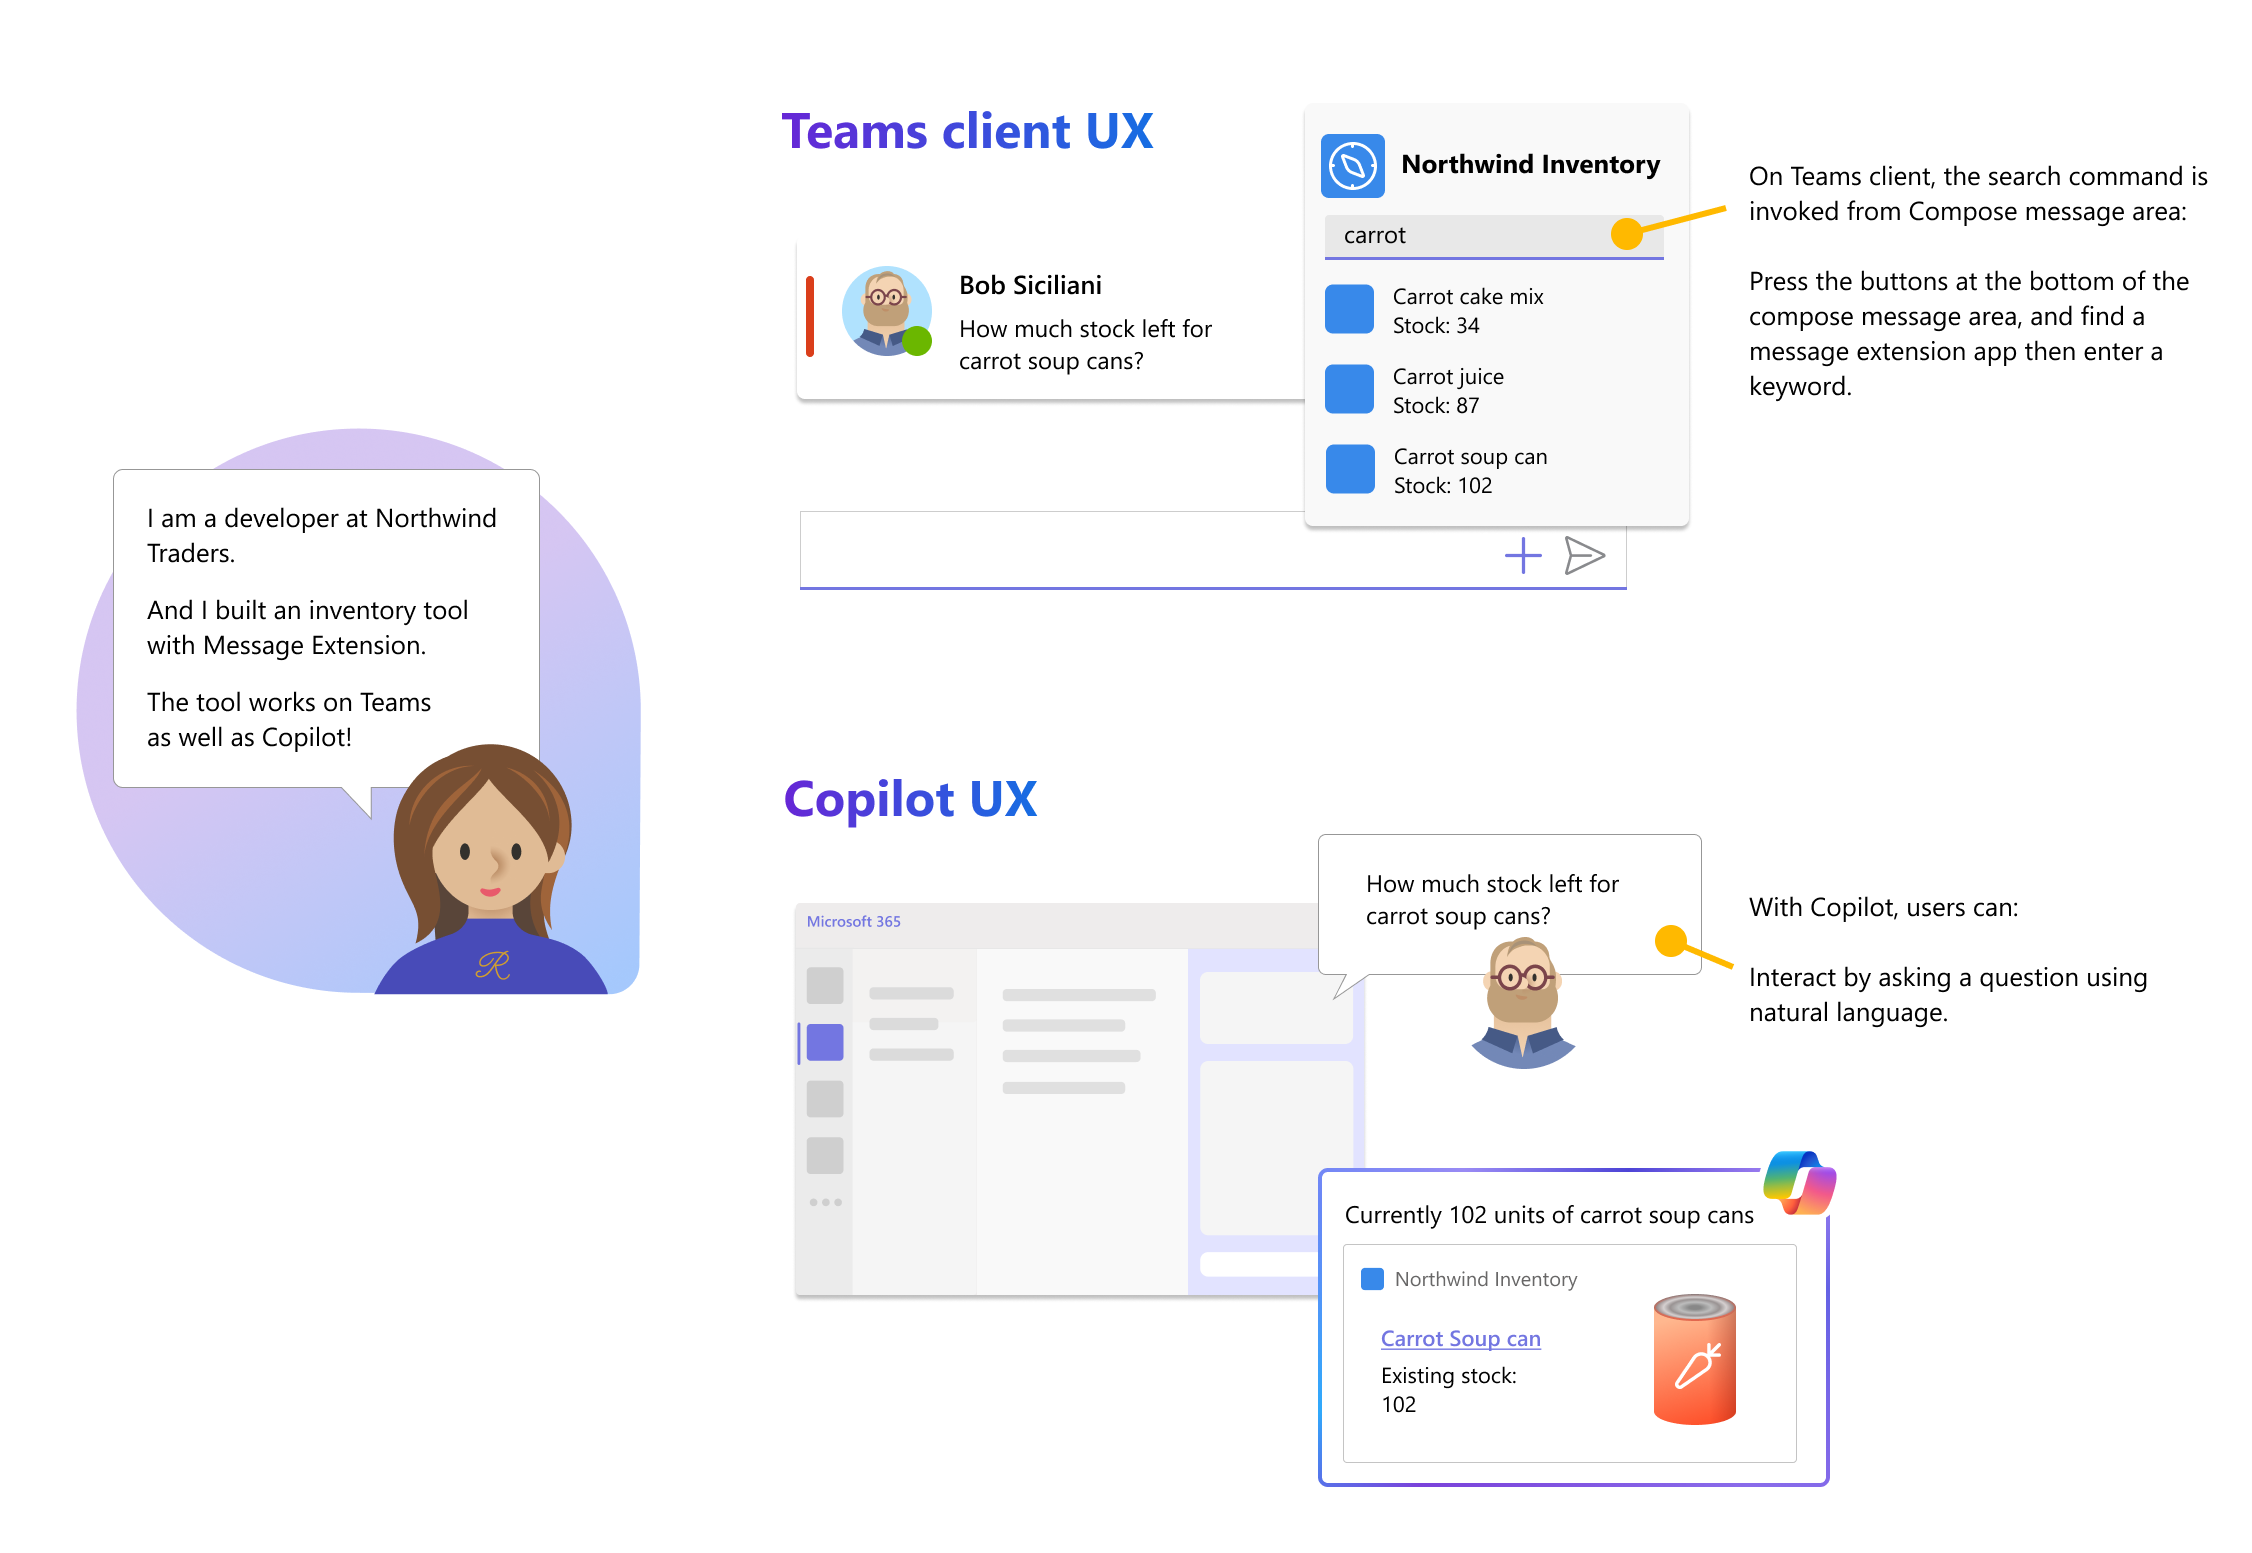 Graphic shows the user experience between Microsoft Teams and Copilot for Microsoft 365.